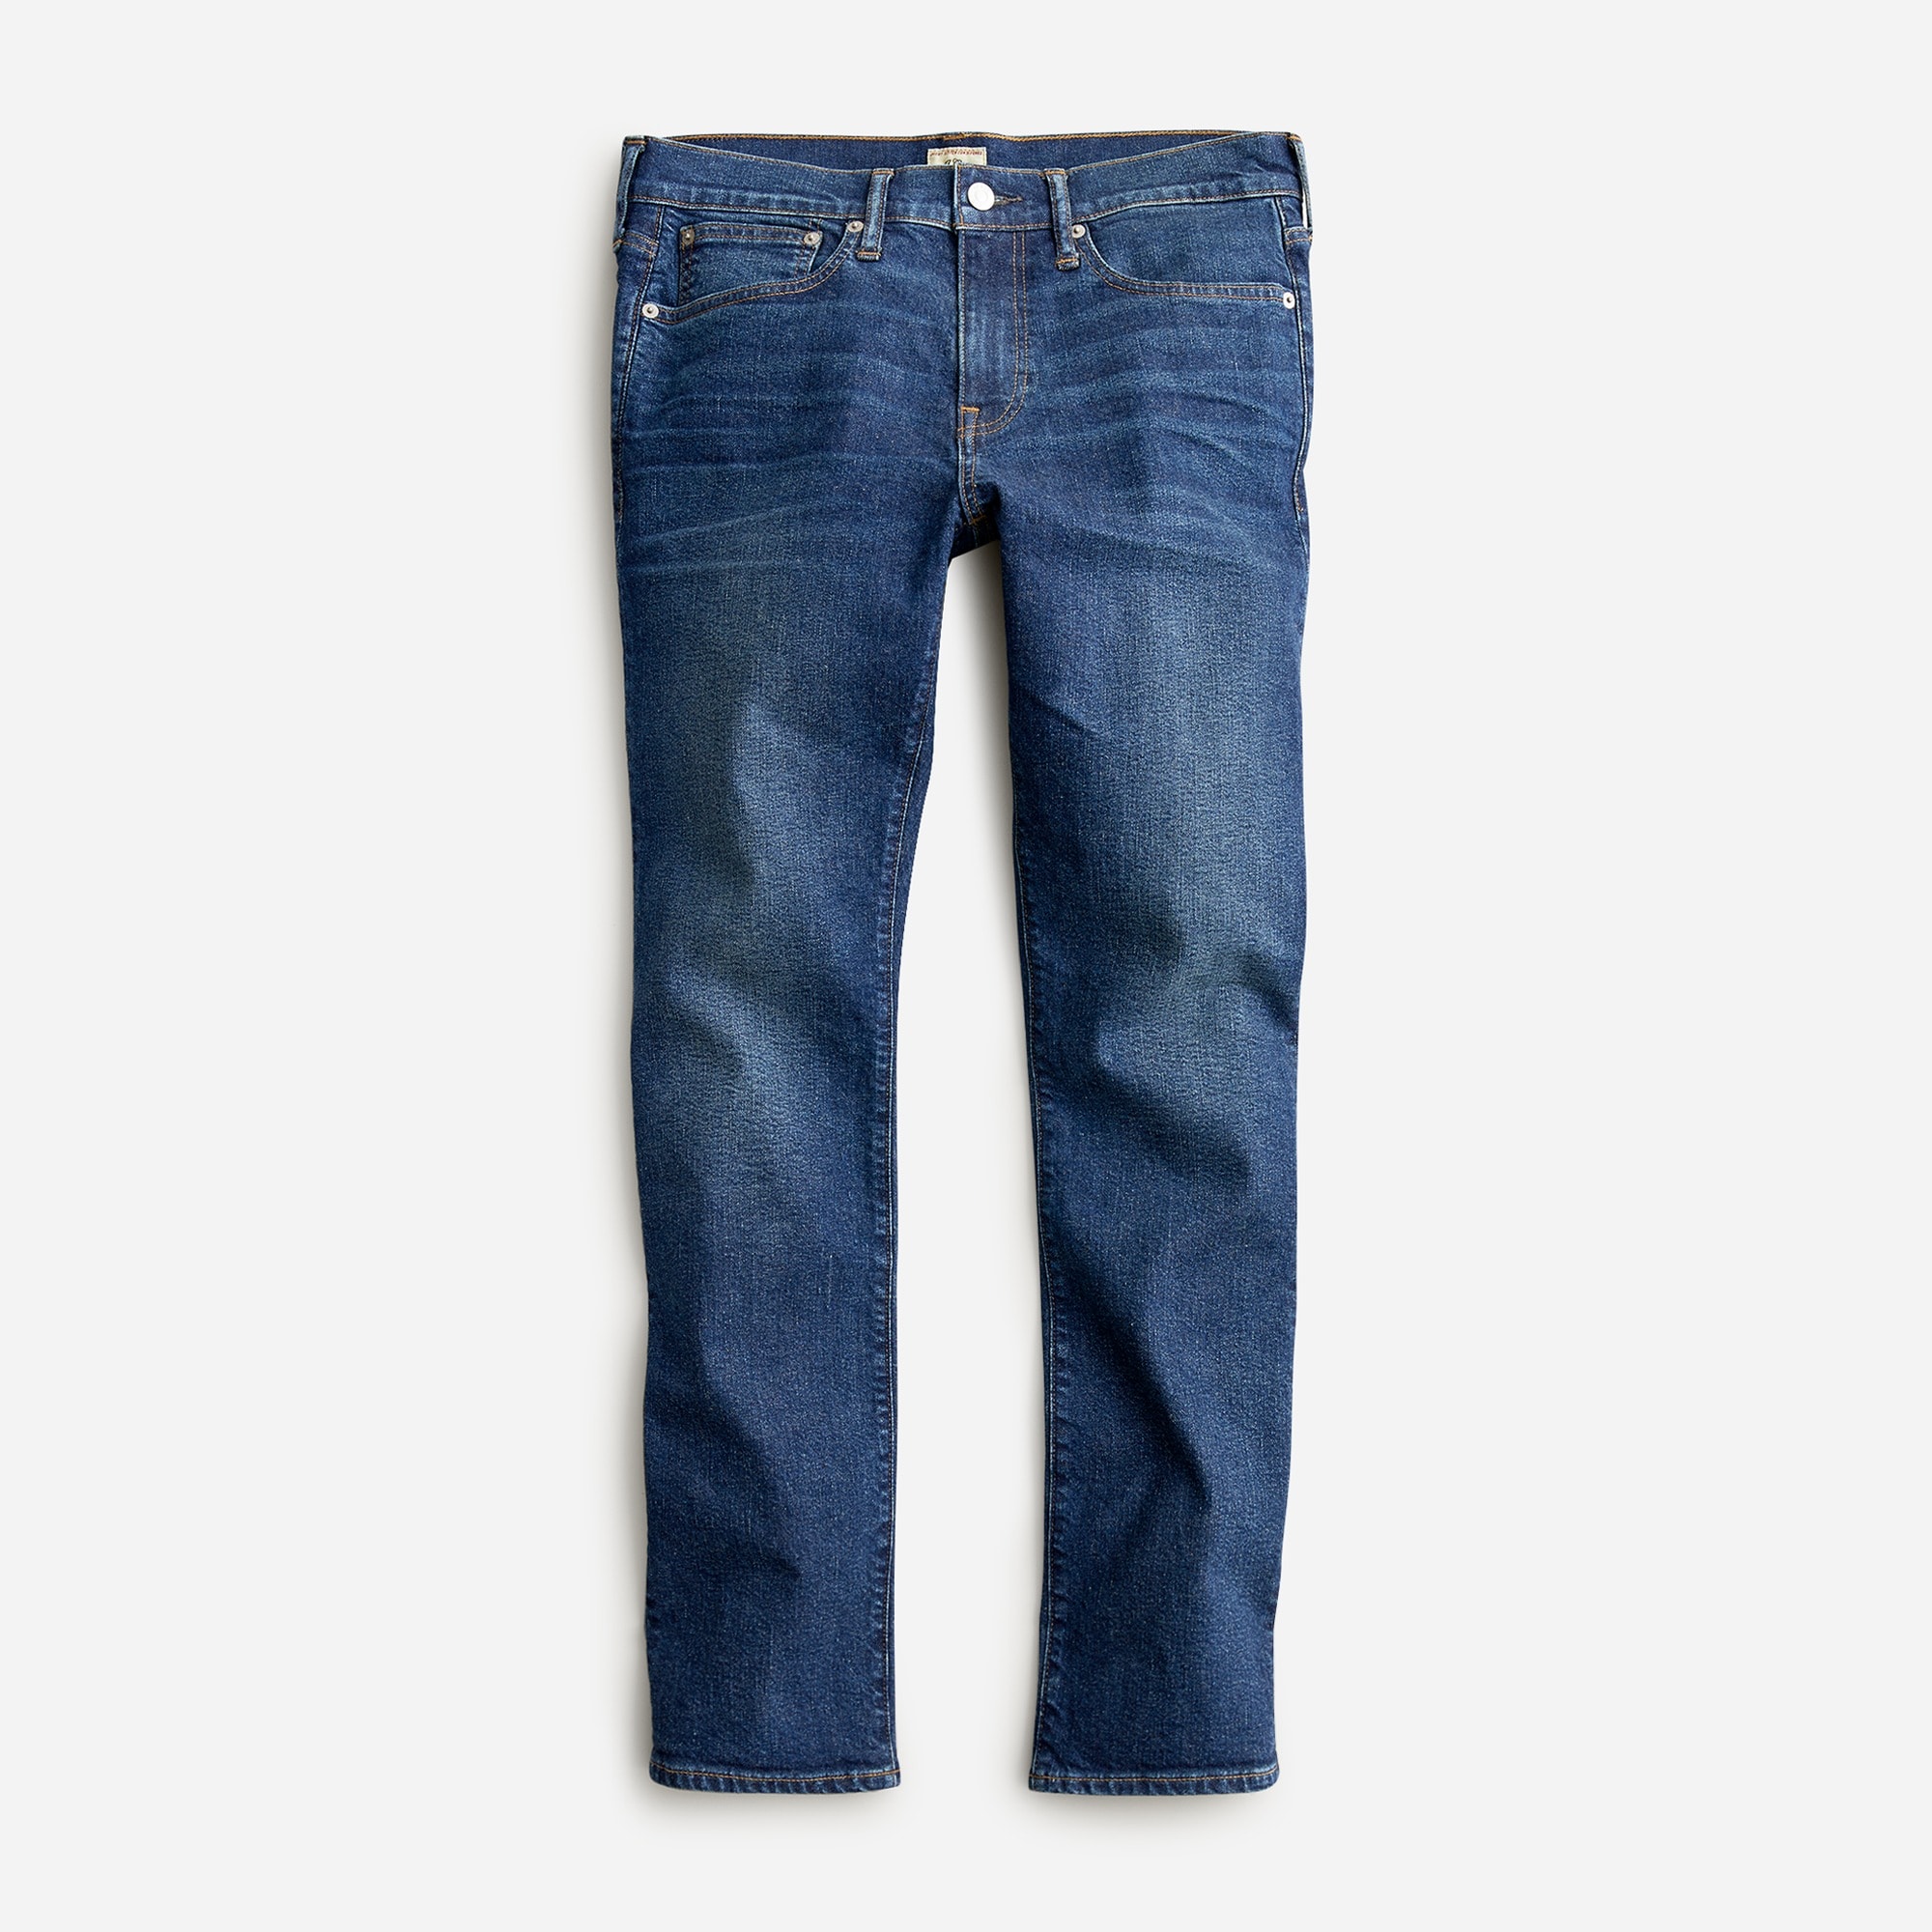 mens 484 Slim-fit stretch jean in one-year wash